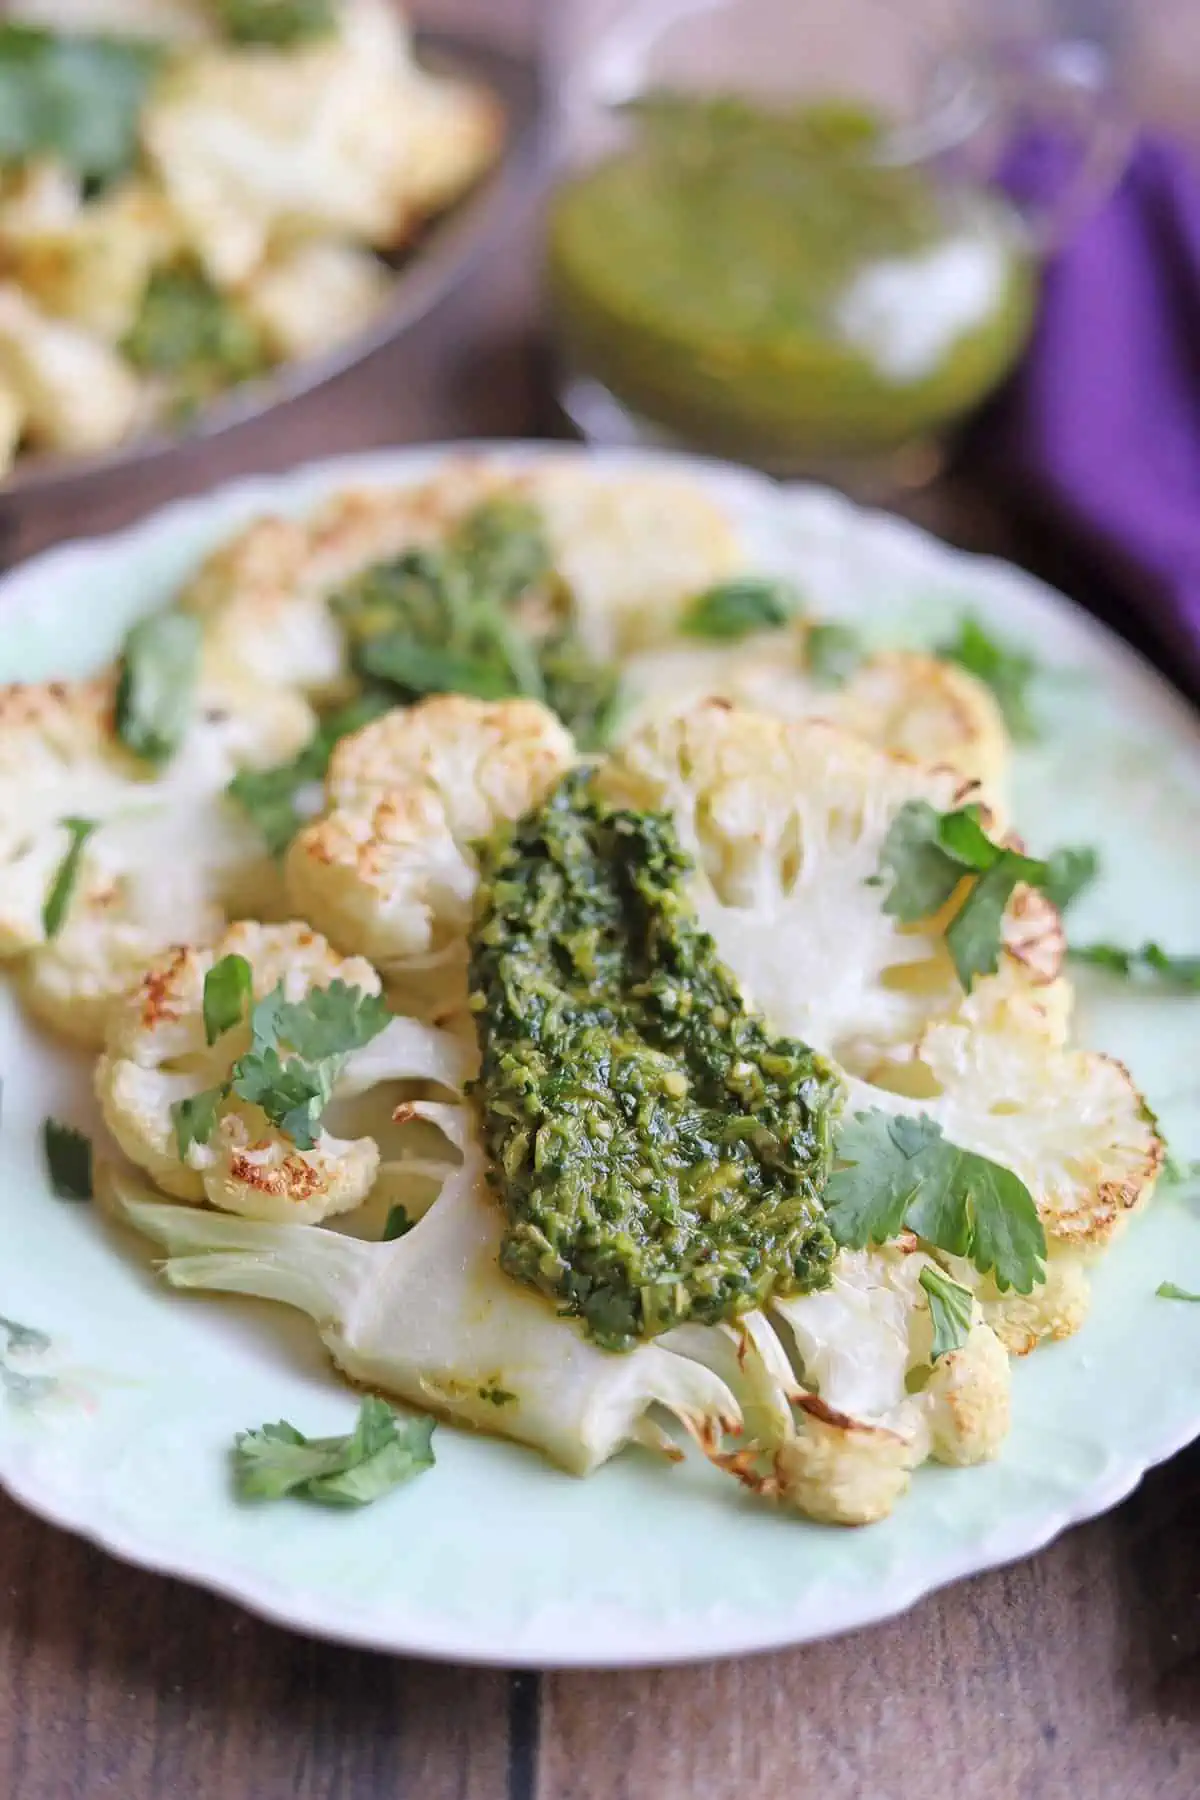 Two cauliflower steaks on a plate topped with chimichurri sauce.